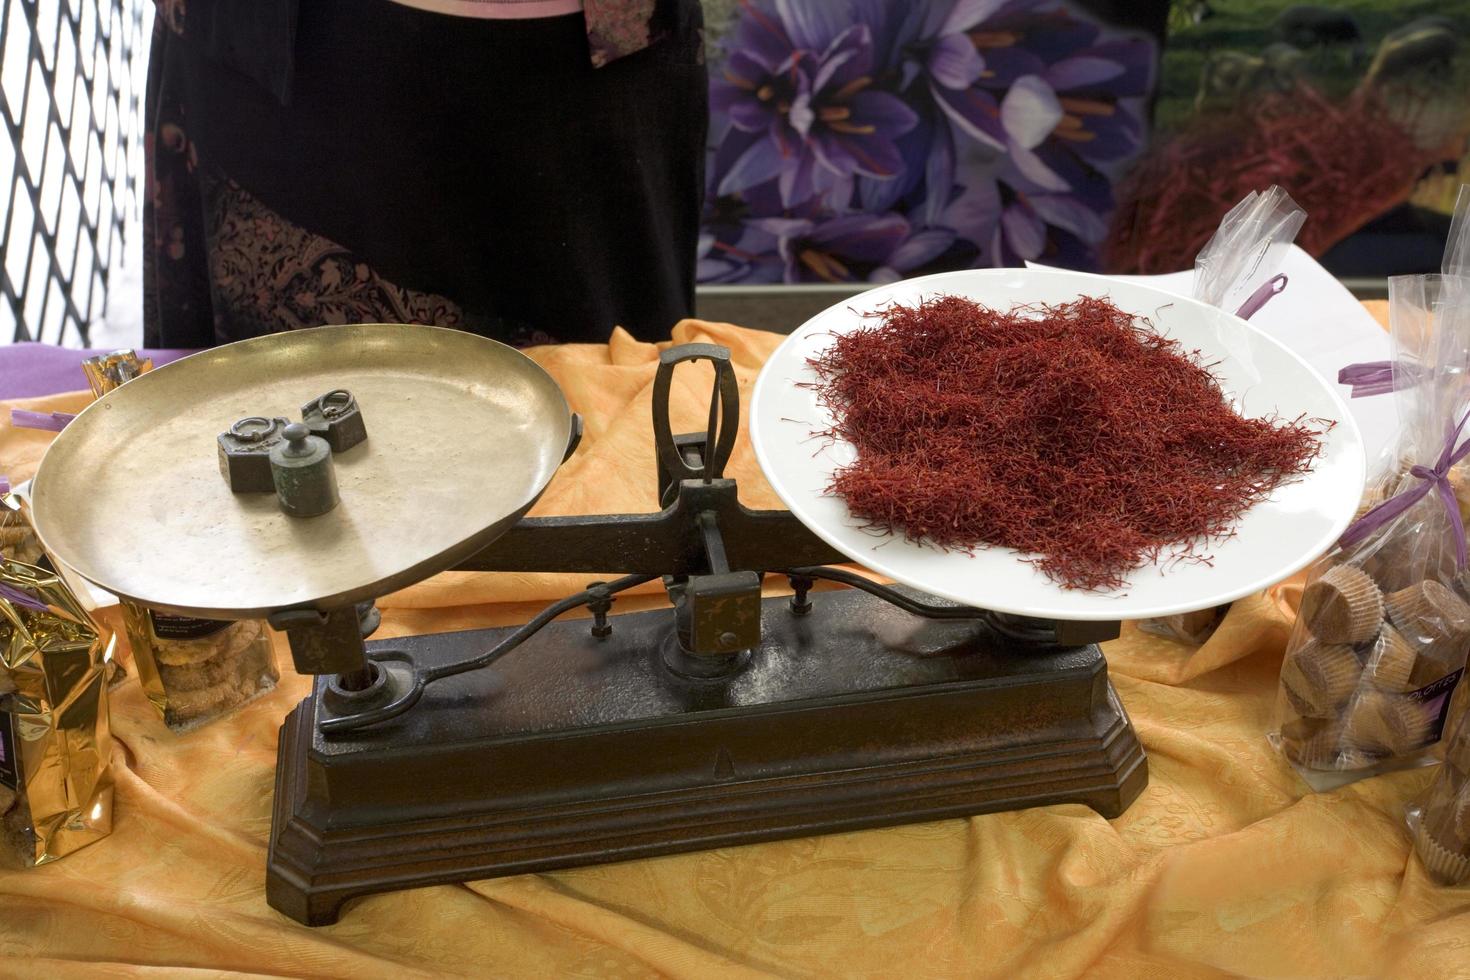 Producer of saffron in France photo